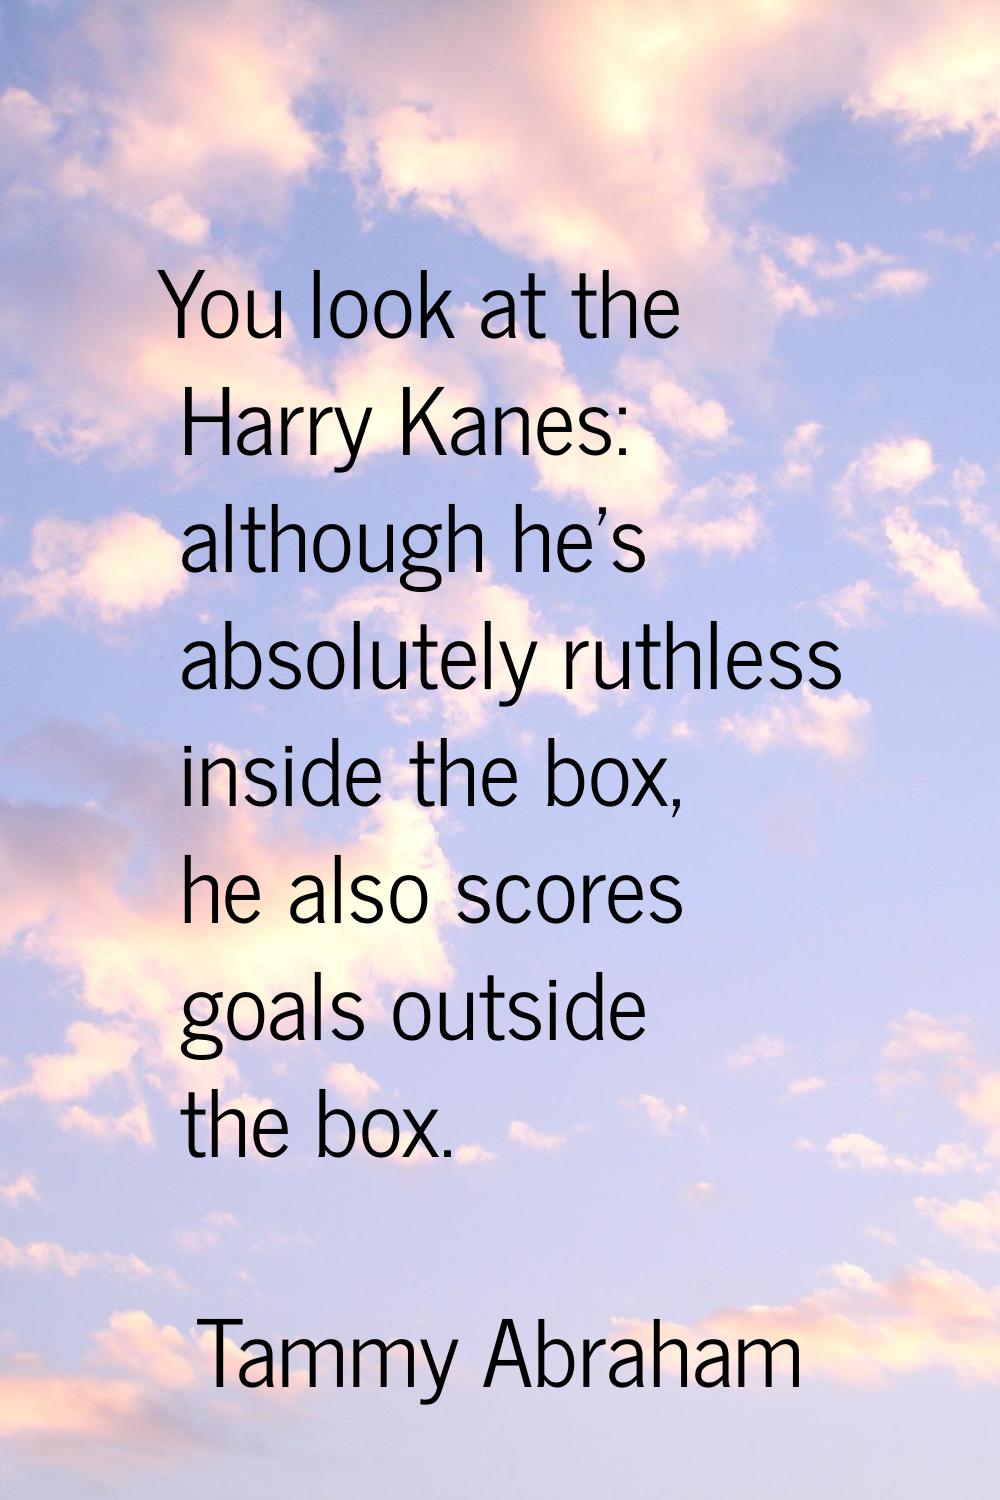 You look at the Harry Kanes: although he's absolutely ruthless inside the box, he also scores goals